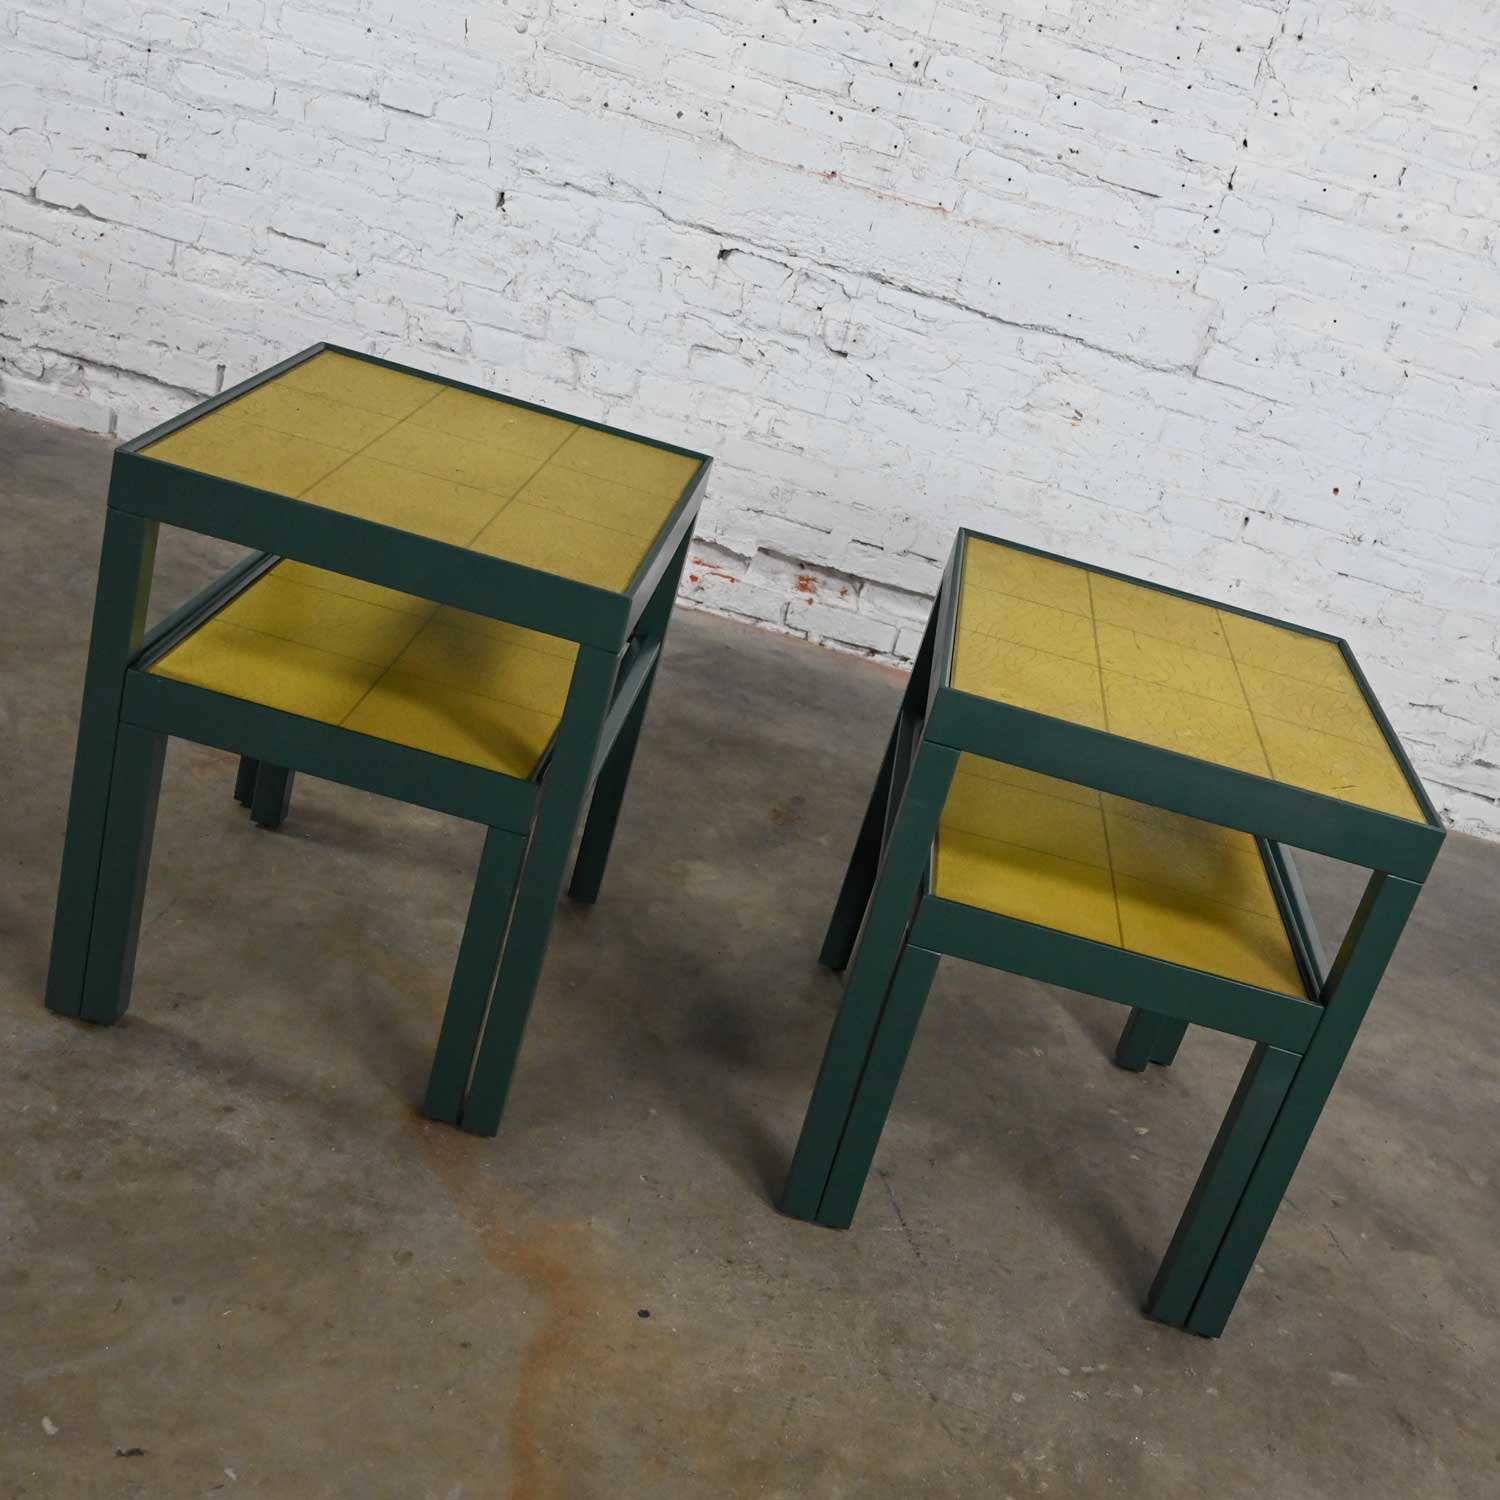 Vintage Campaign Modified Parsons Nesting Tables with Chartreuse Leather Tops 2 Sets of 2 by Kittinger Furniture